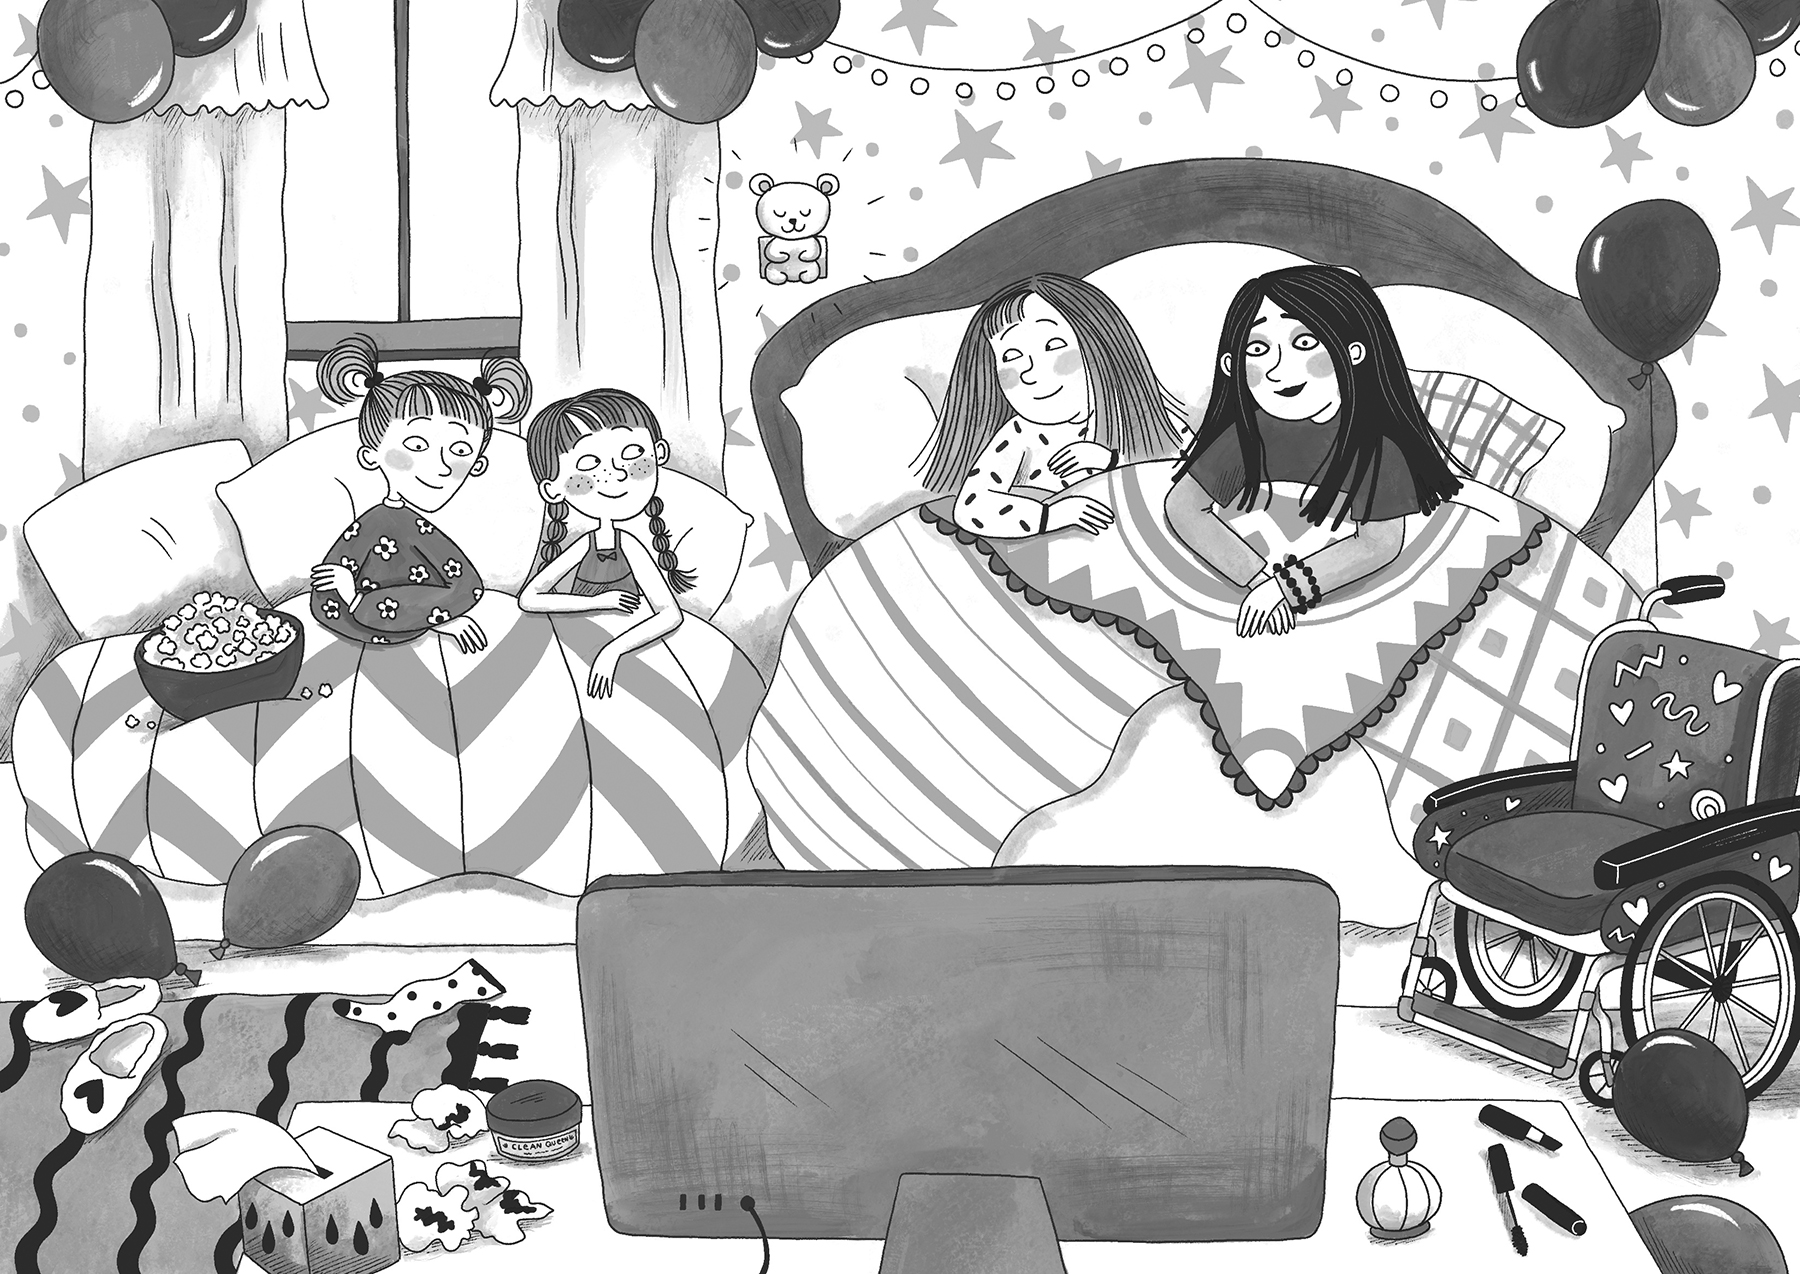 An illustration by Rachael Dean from The Best Sleepover in the World showing Emily, Daisy, Lily and Natalie all enjoying a sleepover at Daisy and Lily's house. All the girls are in bed watching a film together.